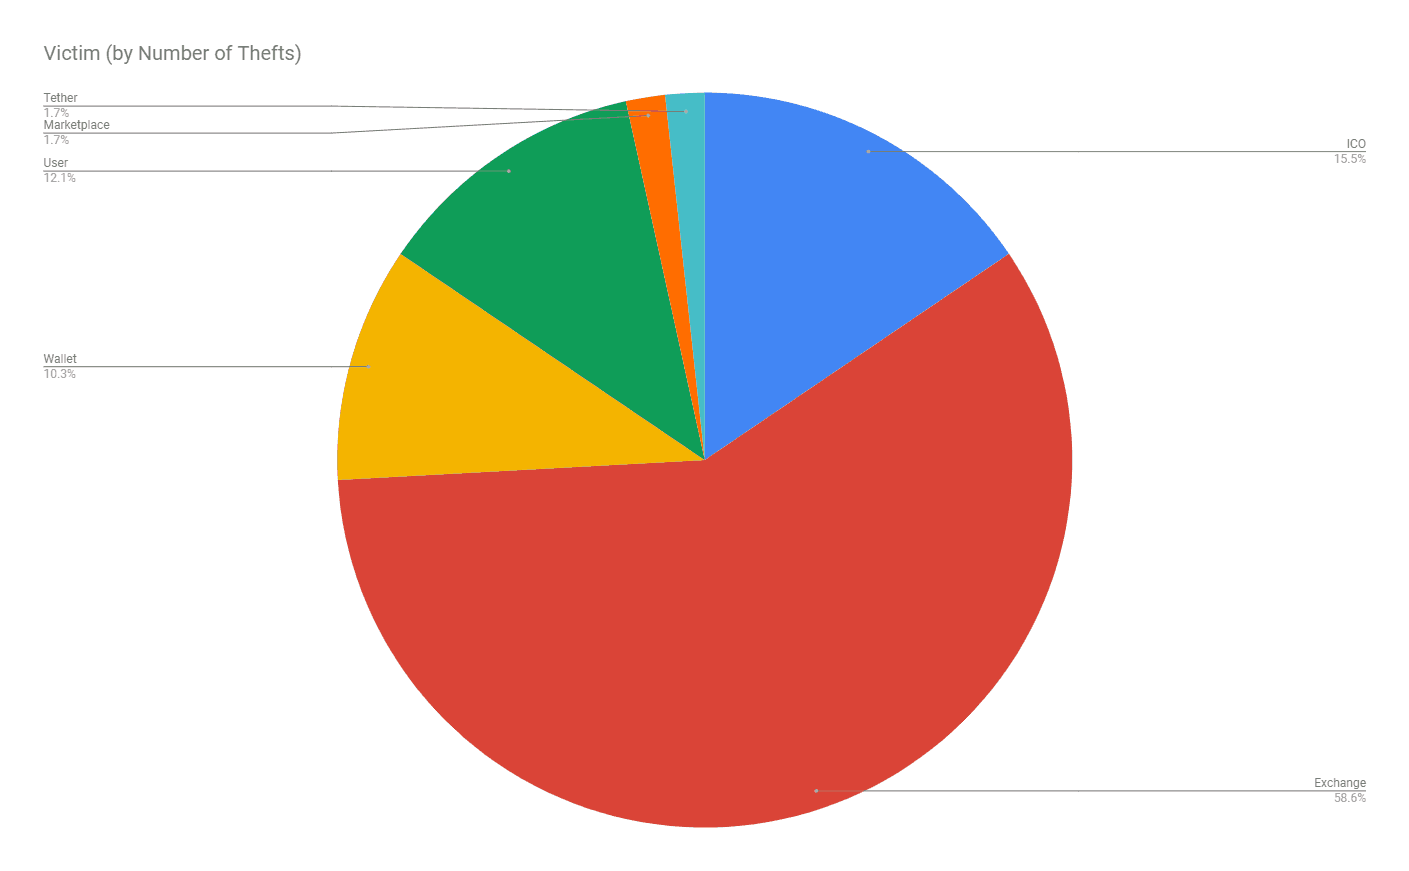 Stolen Cryptocurrency Victims (by Number of Thefts)